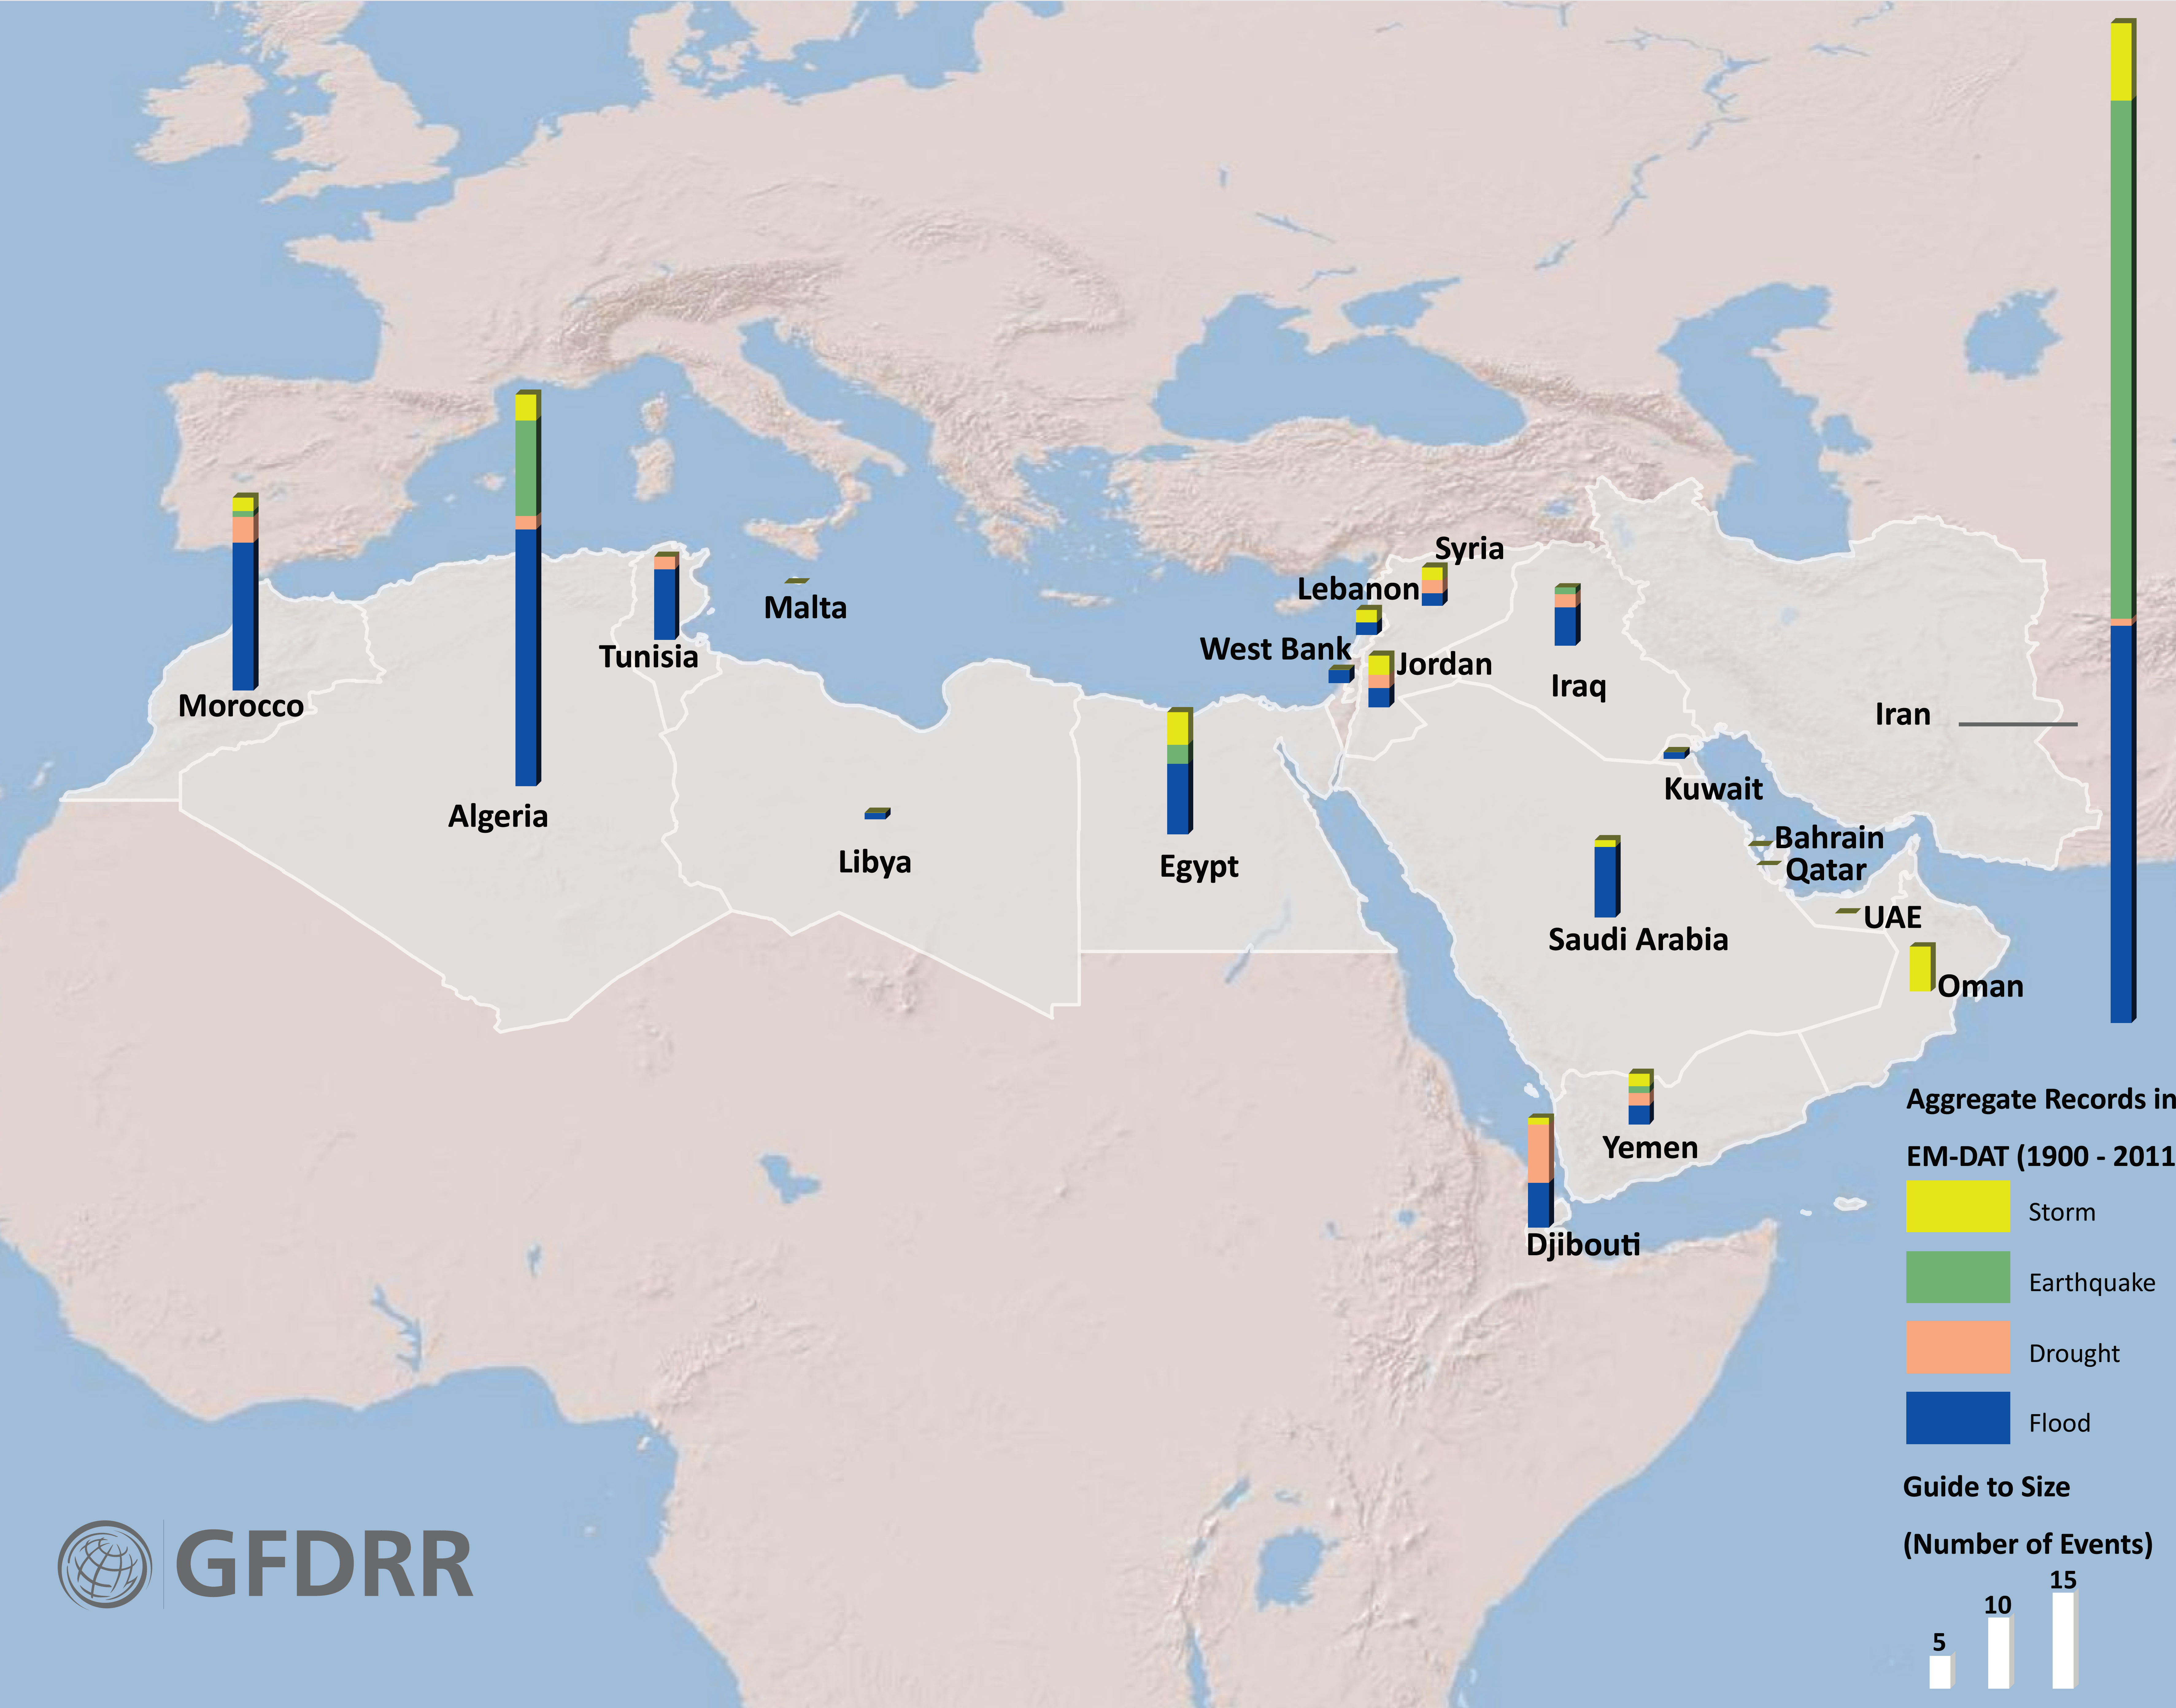 Number and type of natural disasters in the Middle East and North Africa